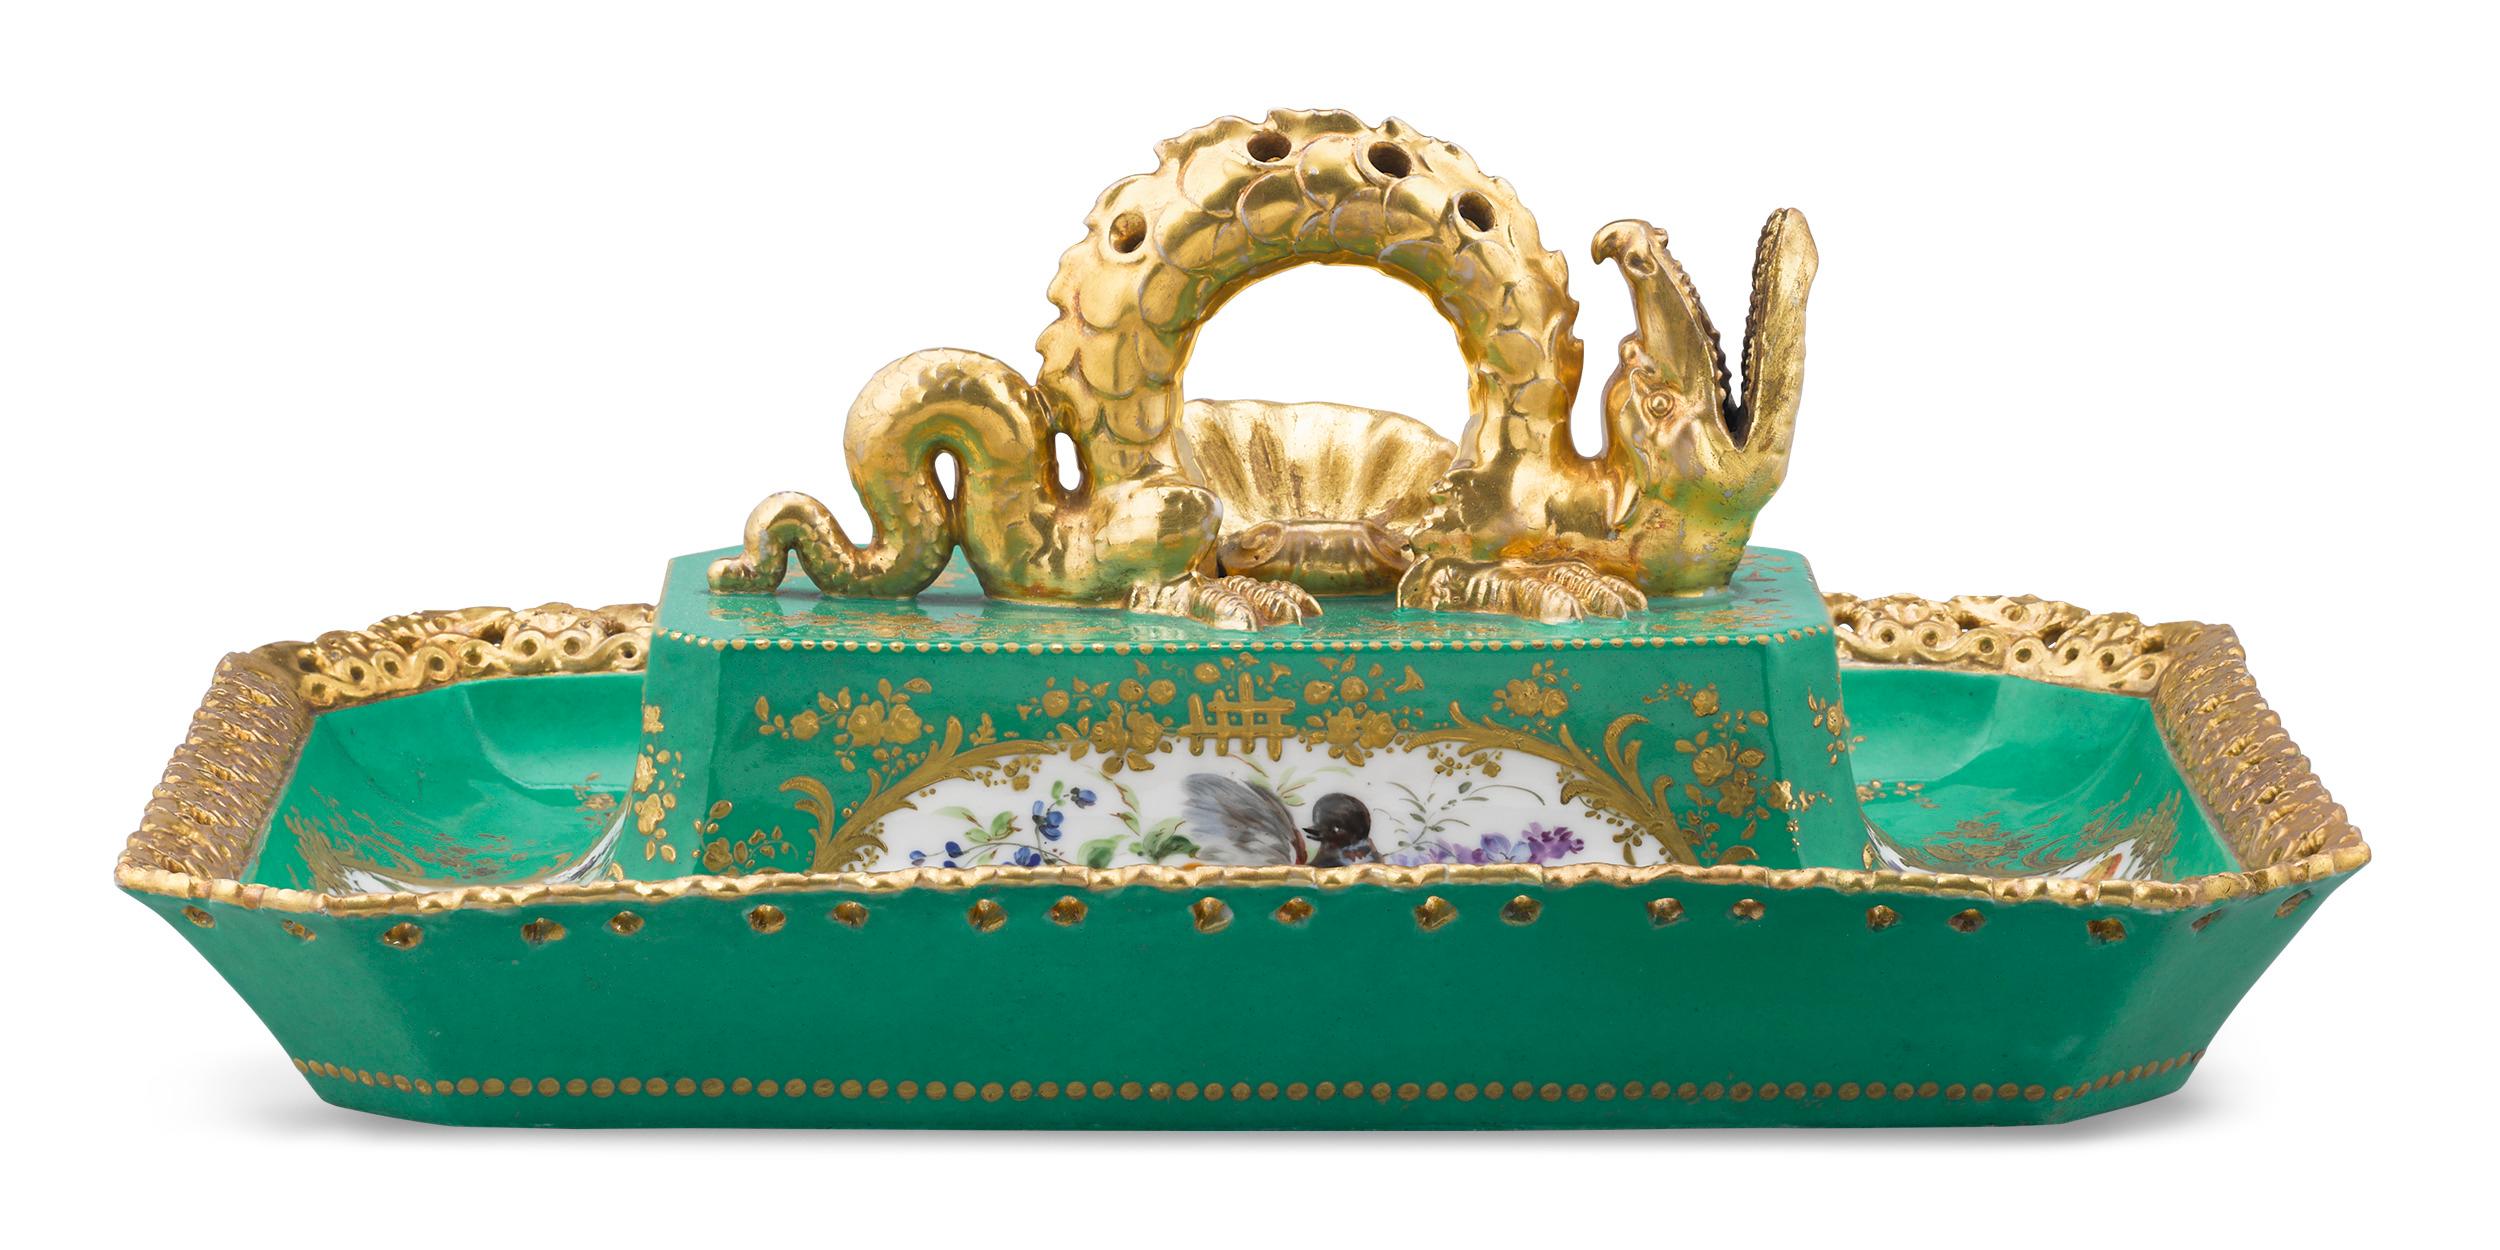 This richly decorated tray was created by celebrated French porcelain manufacturer Jacob Petit. Topped by an impressive gilt Chinese dragon, the piece is distinguished by finely hand-painted scenes depicting songbirds and floral arrangements against